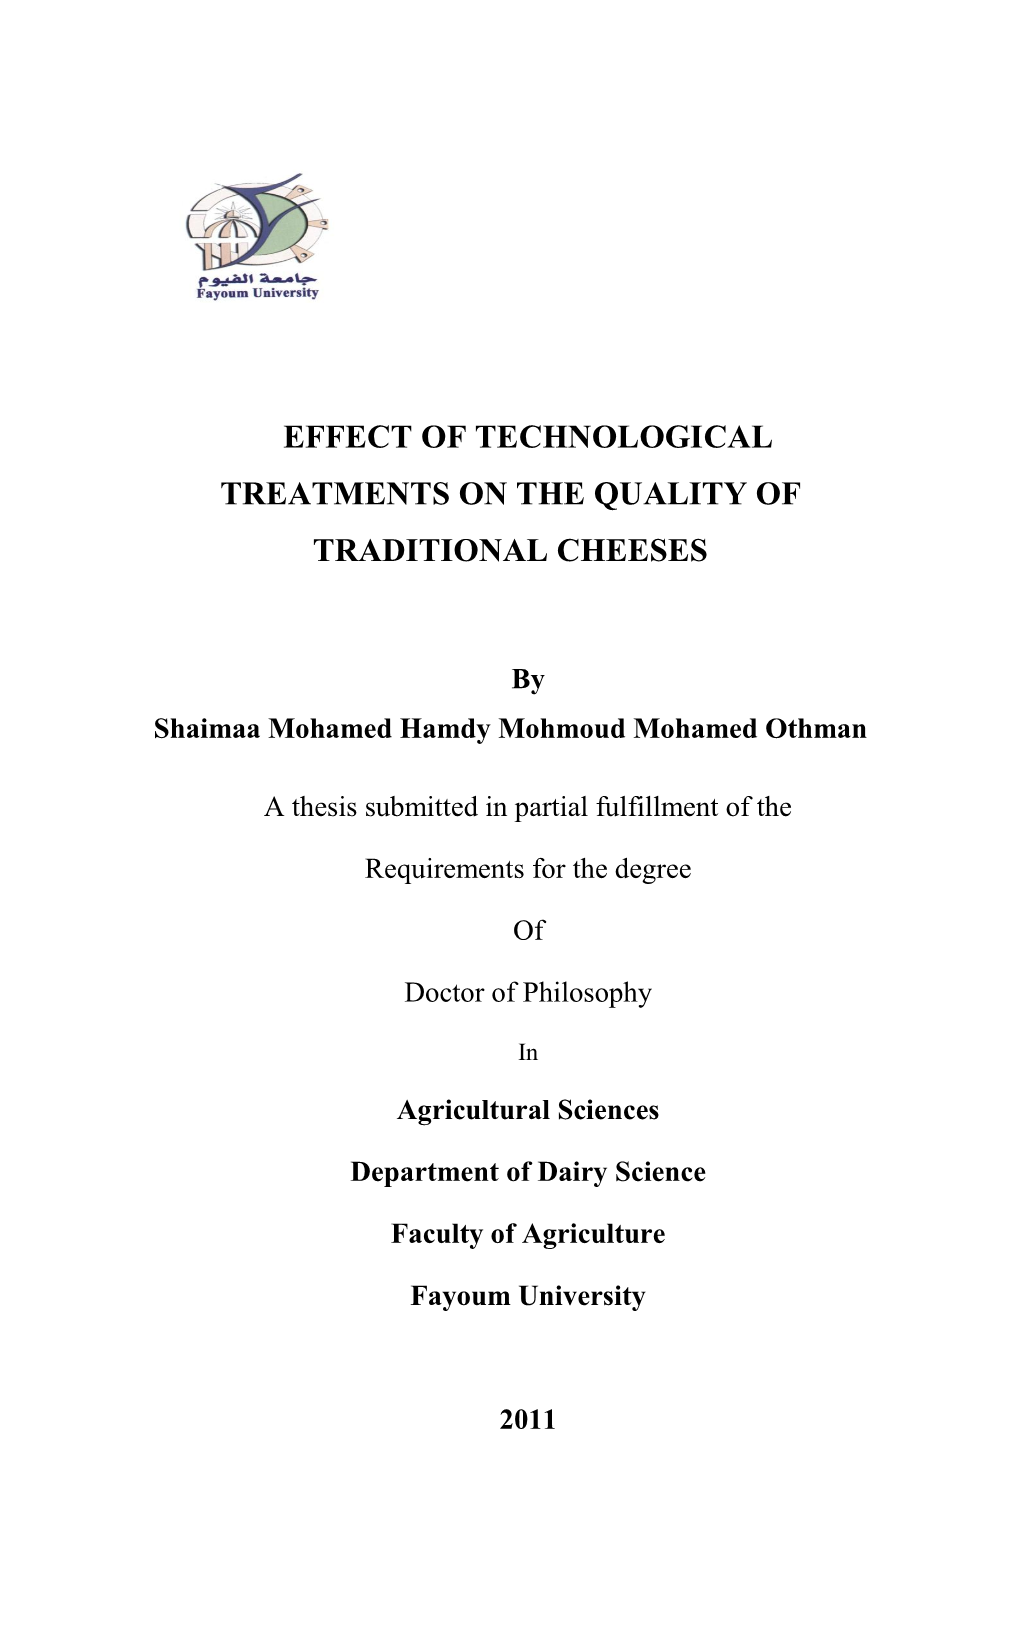 Effect of Technological Treatments on the Quality of Traditional Cheeses